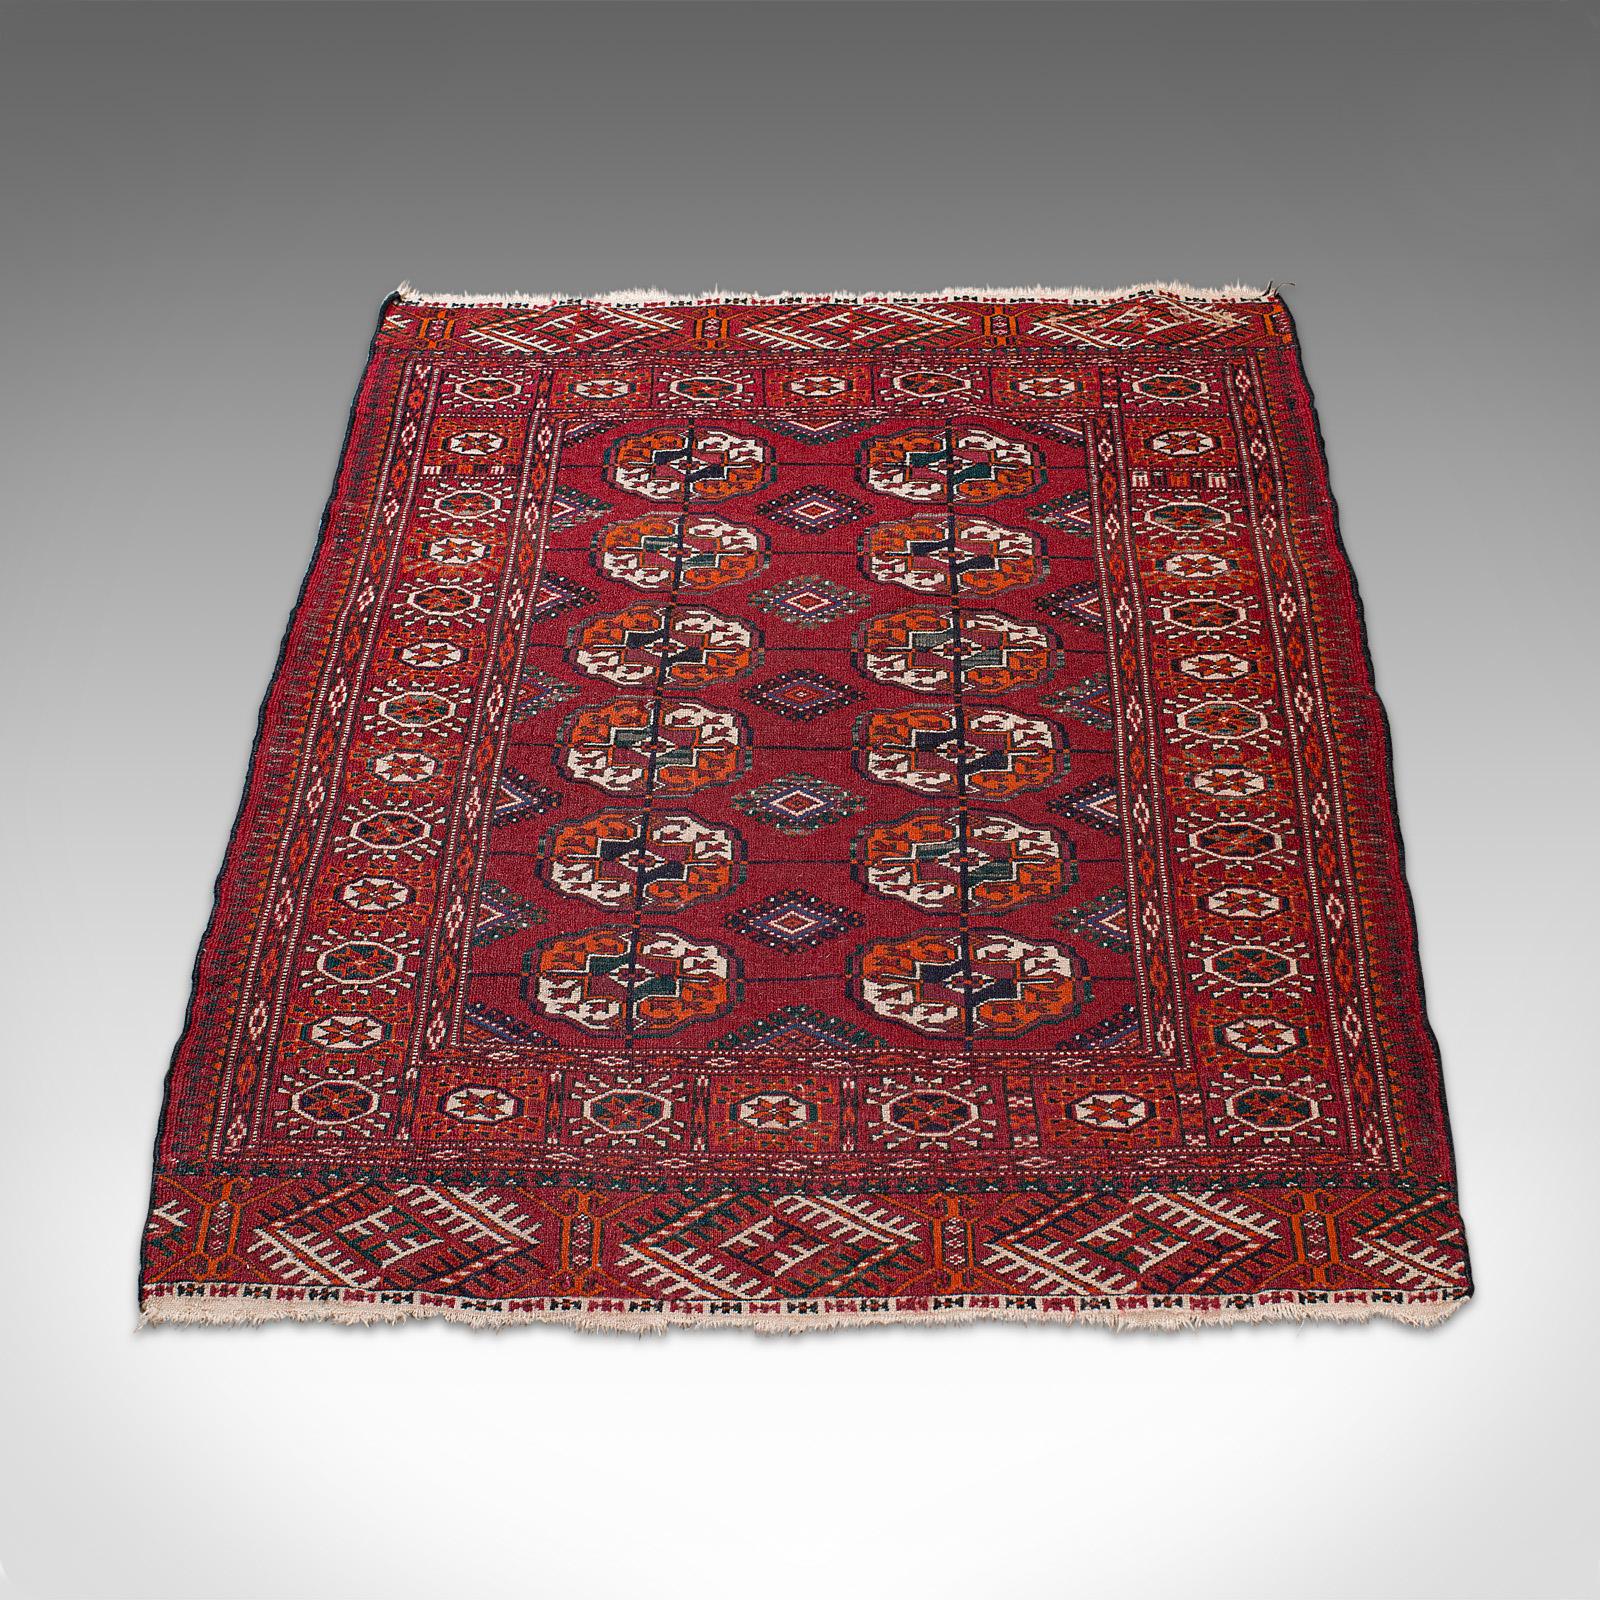 This is an antique Tekke Bokhara rug. A Middle Eastern, nomadic Turkoman carpet or wall covering, dating to the late 19th century, circa 1900.

Add warmth to your room with this deep red rug
Displaying a desirable aged patina - presenting minimal